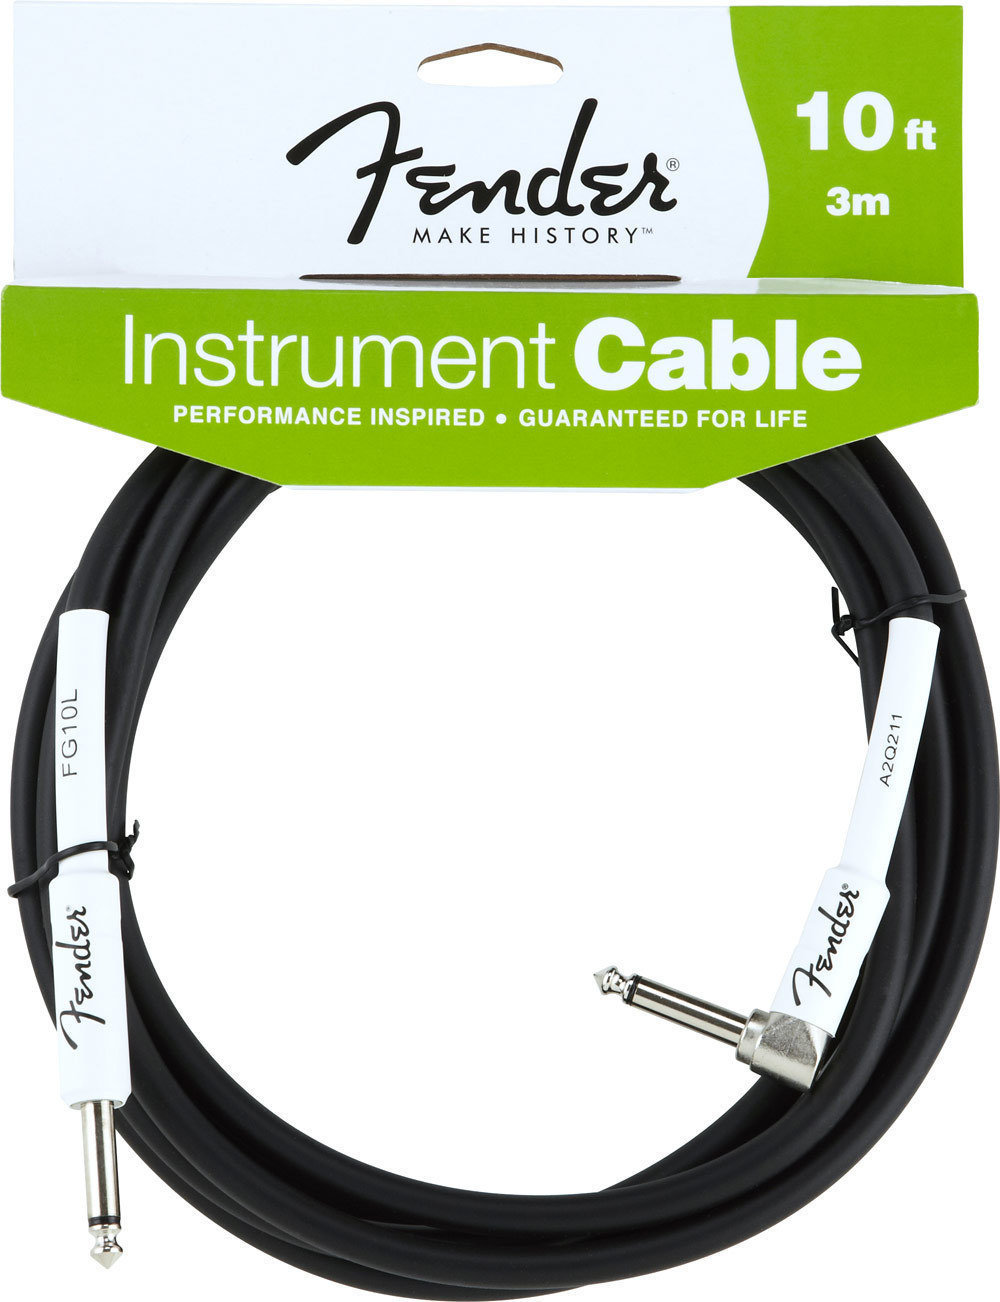 Instrument Cable Fender Performance Series Instrument Cable 3m Angled BLK